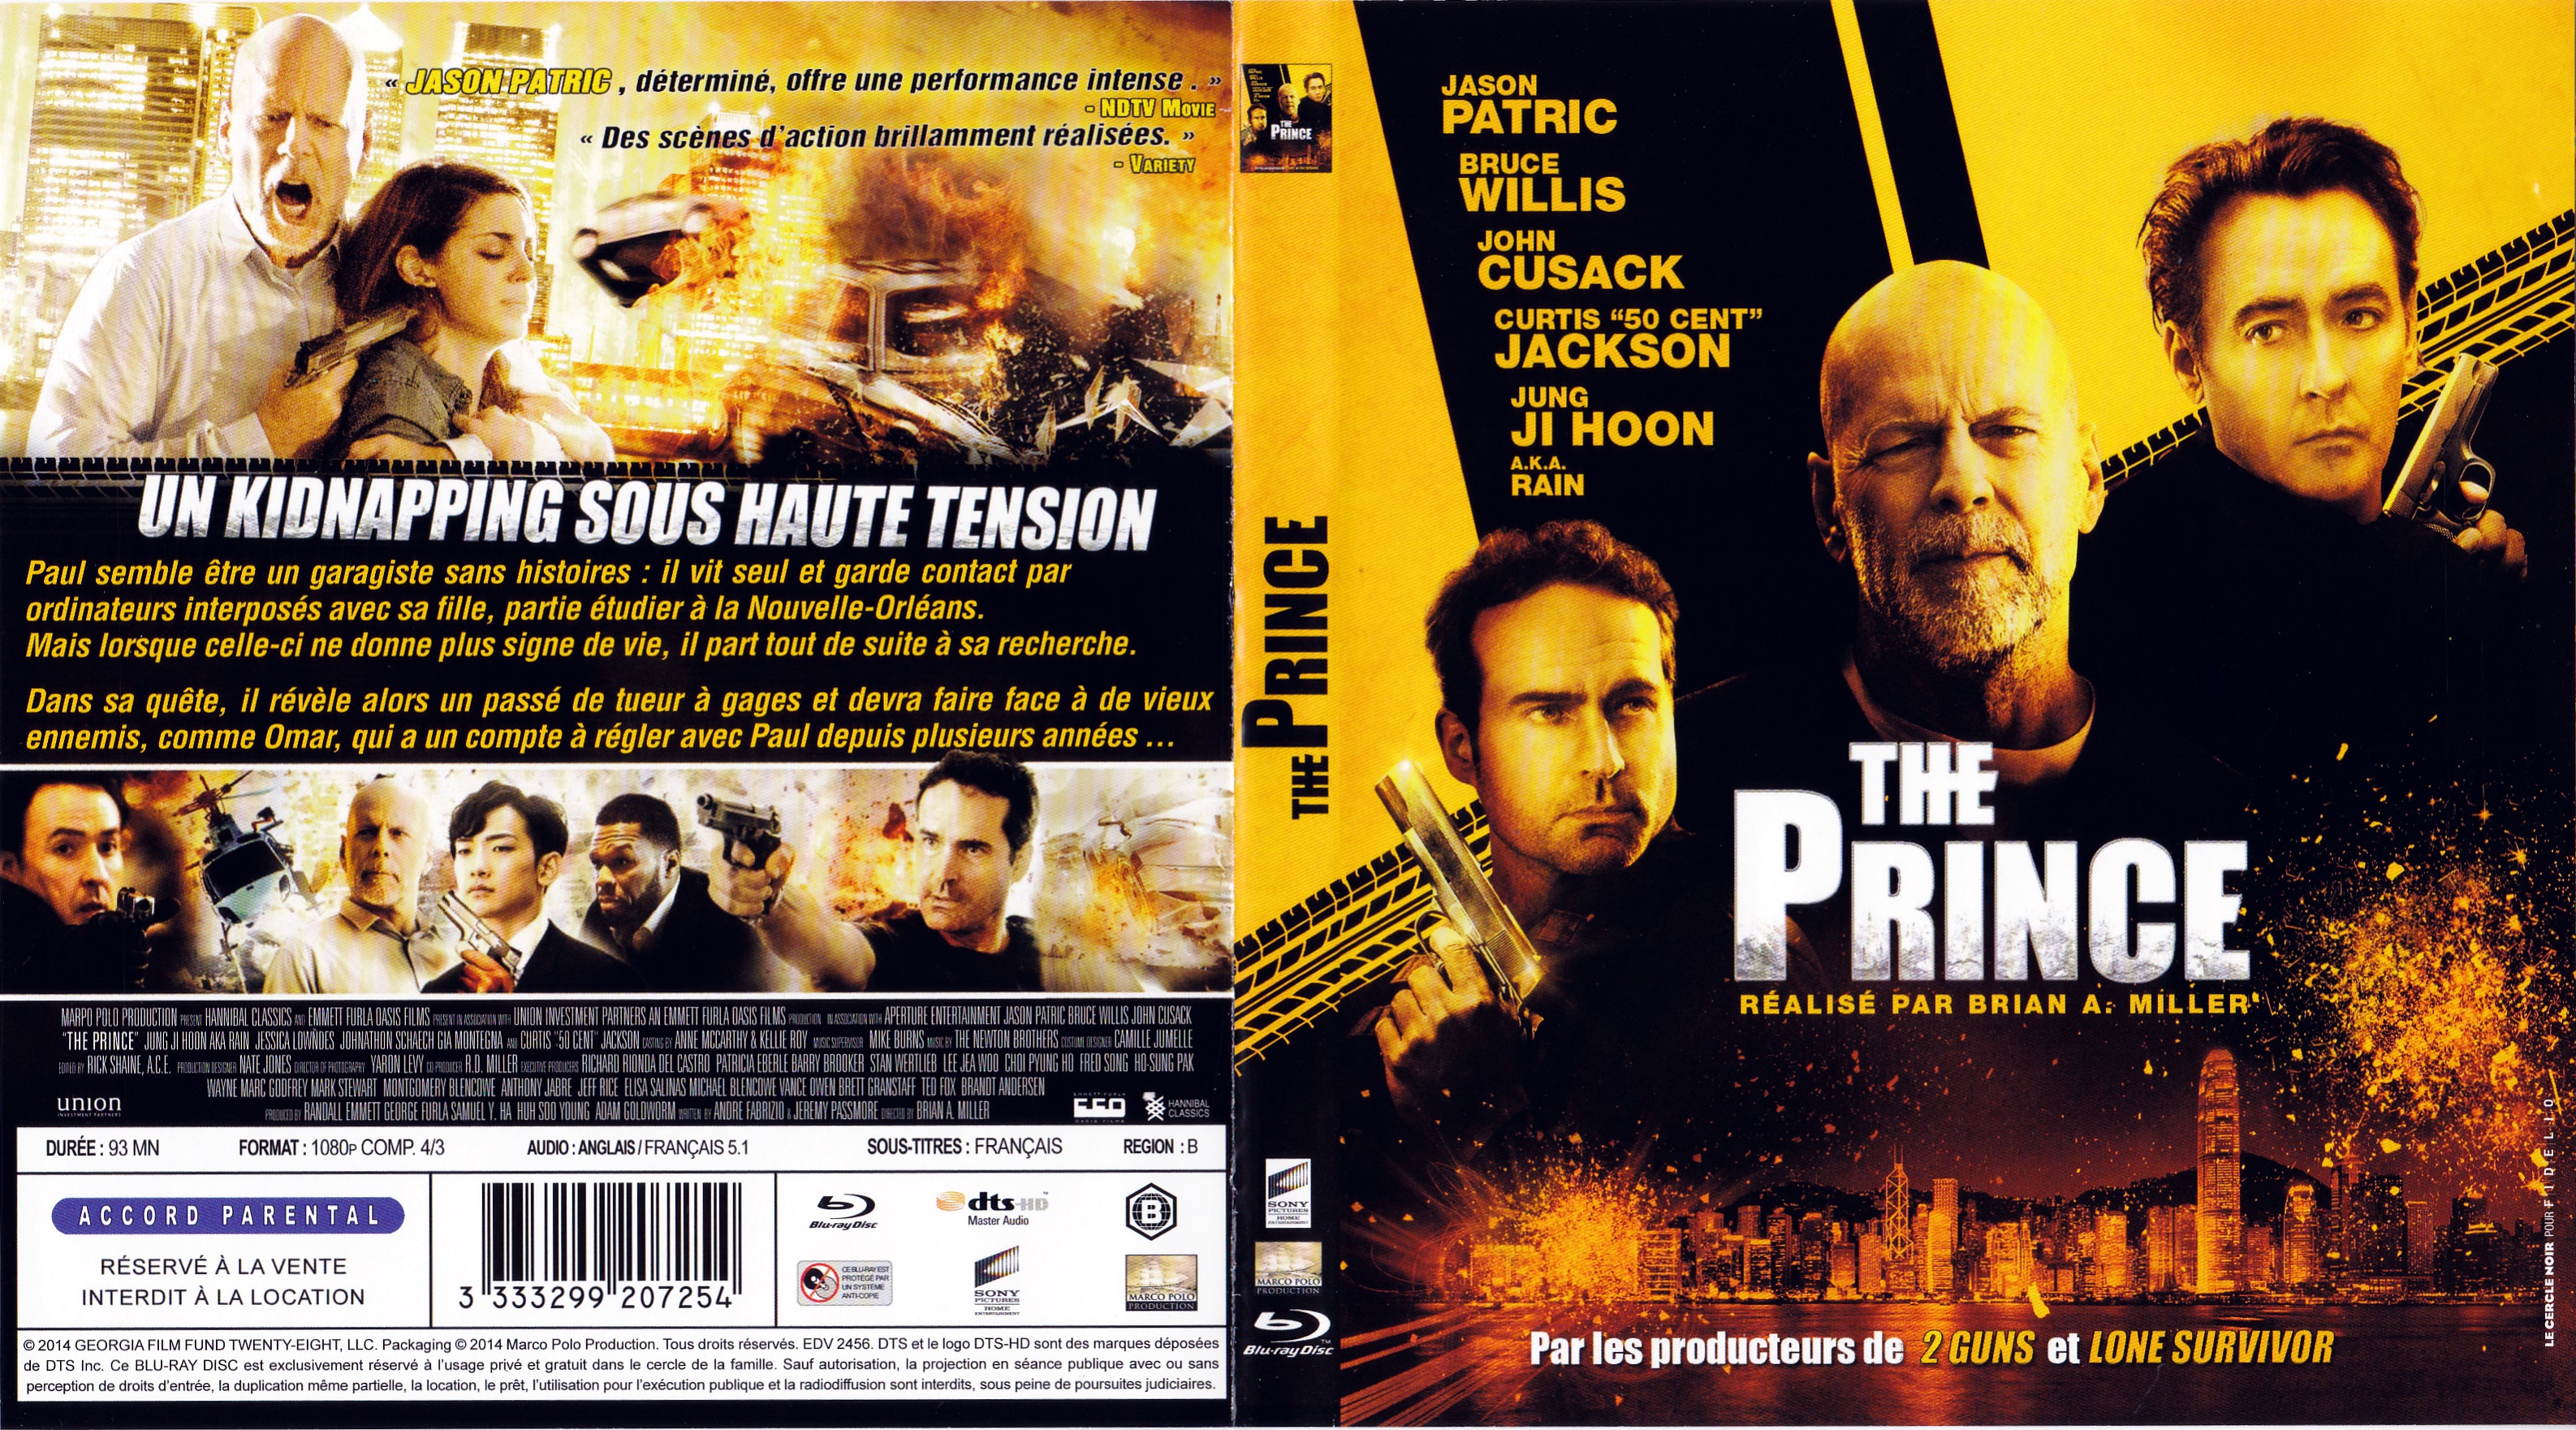 Jaquette DVD The prince (BLU-RAY)